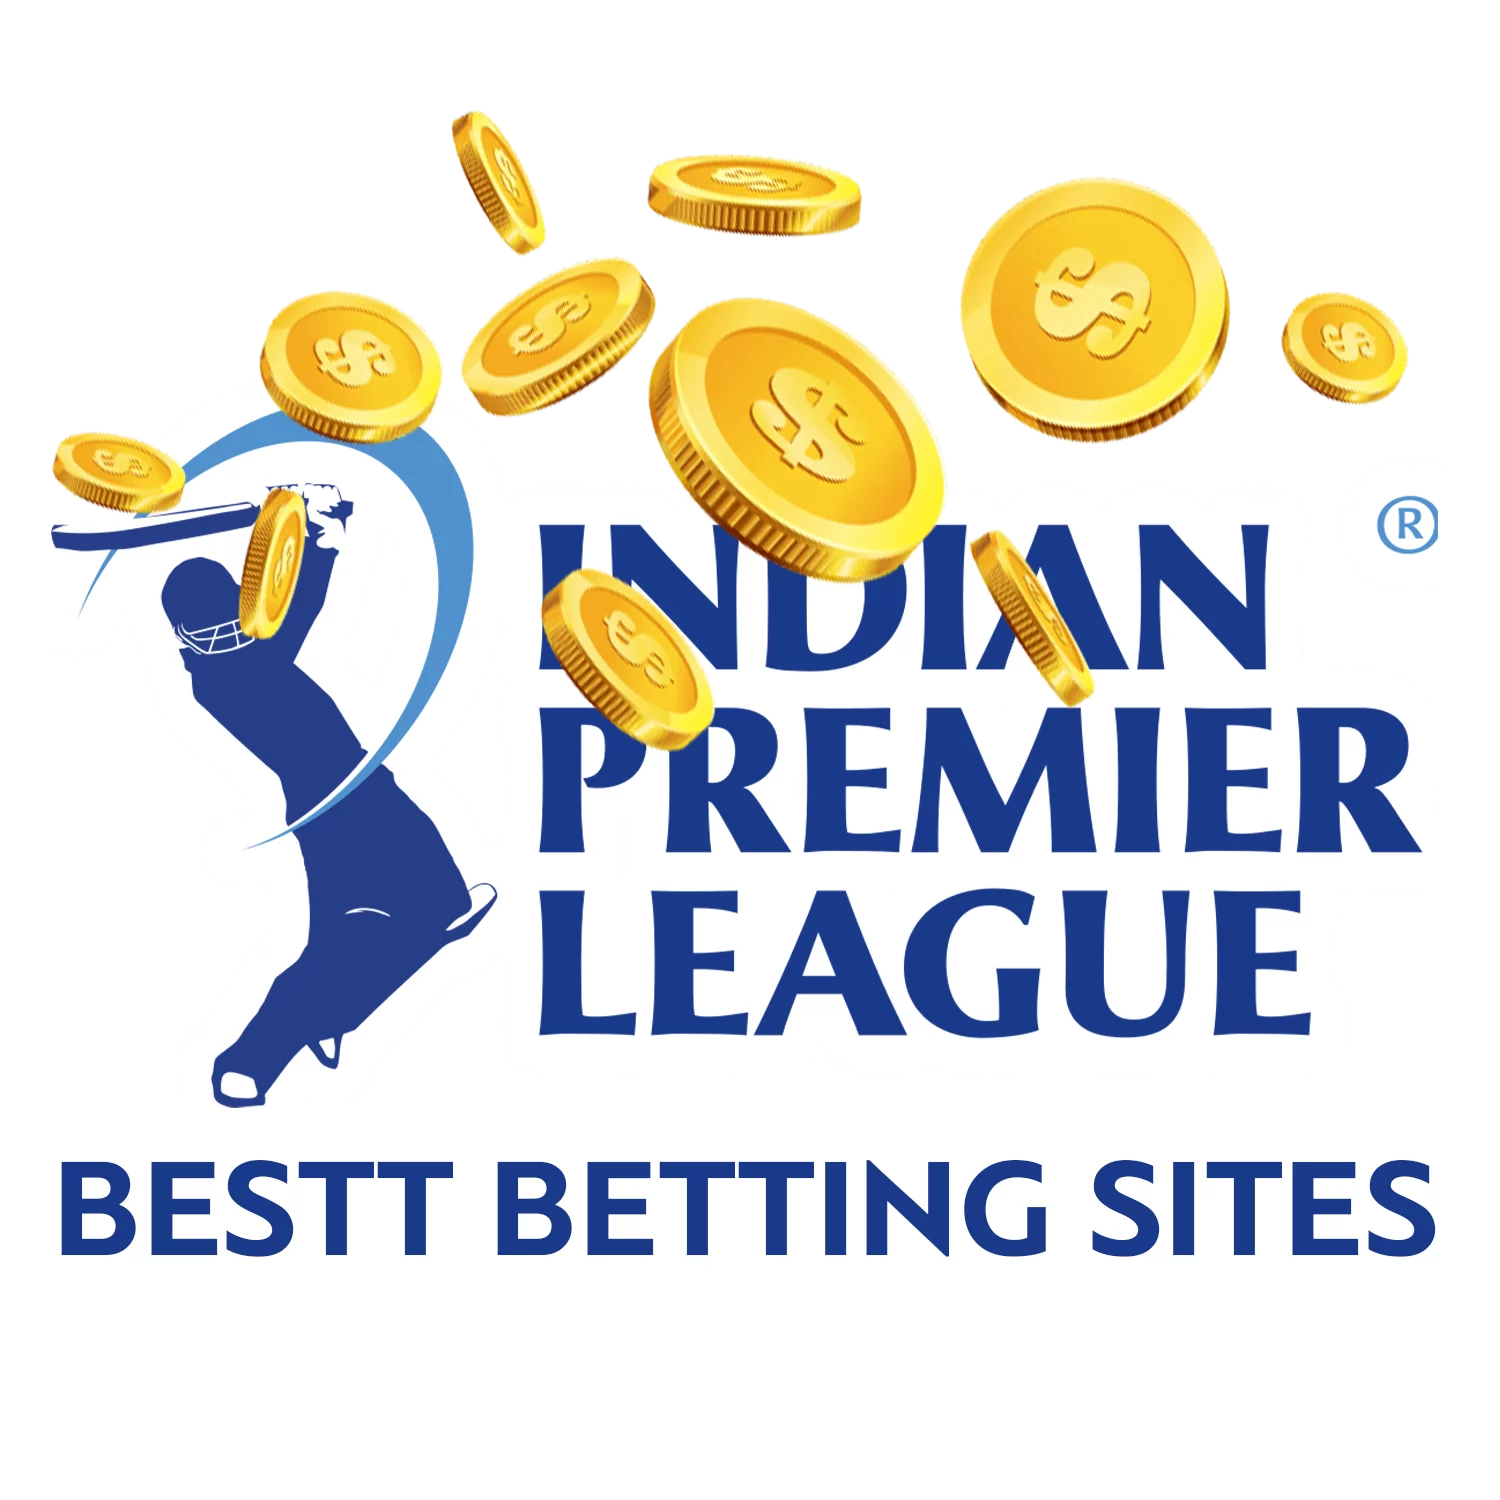 Here we have a list of the best IPL betting sites and teams that are supposed to win.